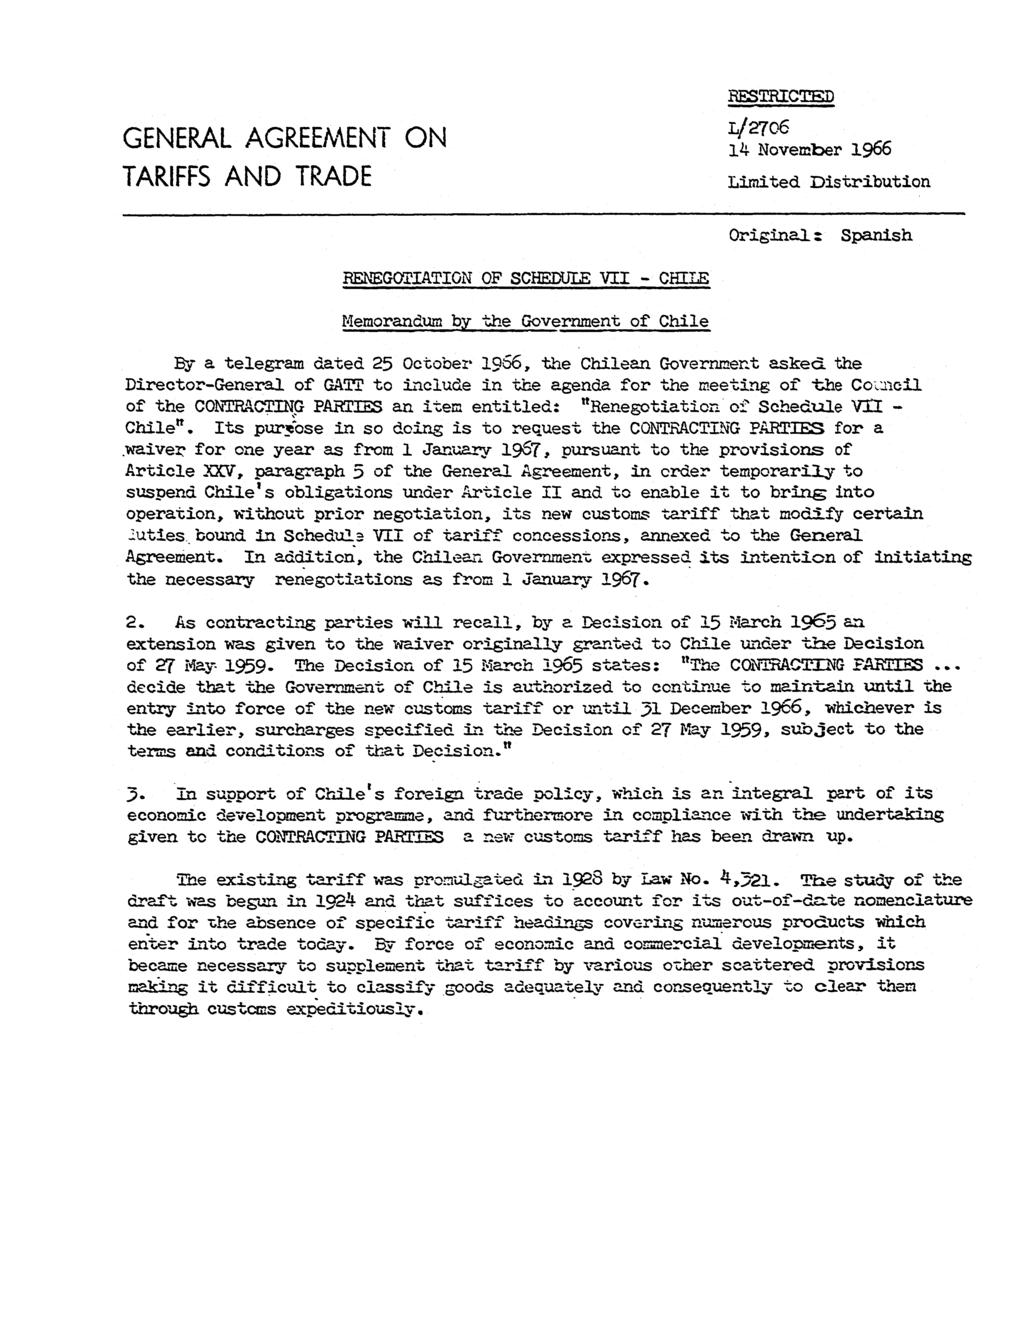 GENERAL AGREEMENT ON TARIFFS AND TRADE RESTRICTED 14November1966 Limited Distribution Original: Spanish REGOTIATION OF SCHEDULE VII - CHILE Memorandum by the Government of Chile By a telegram dated